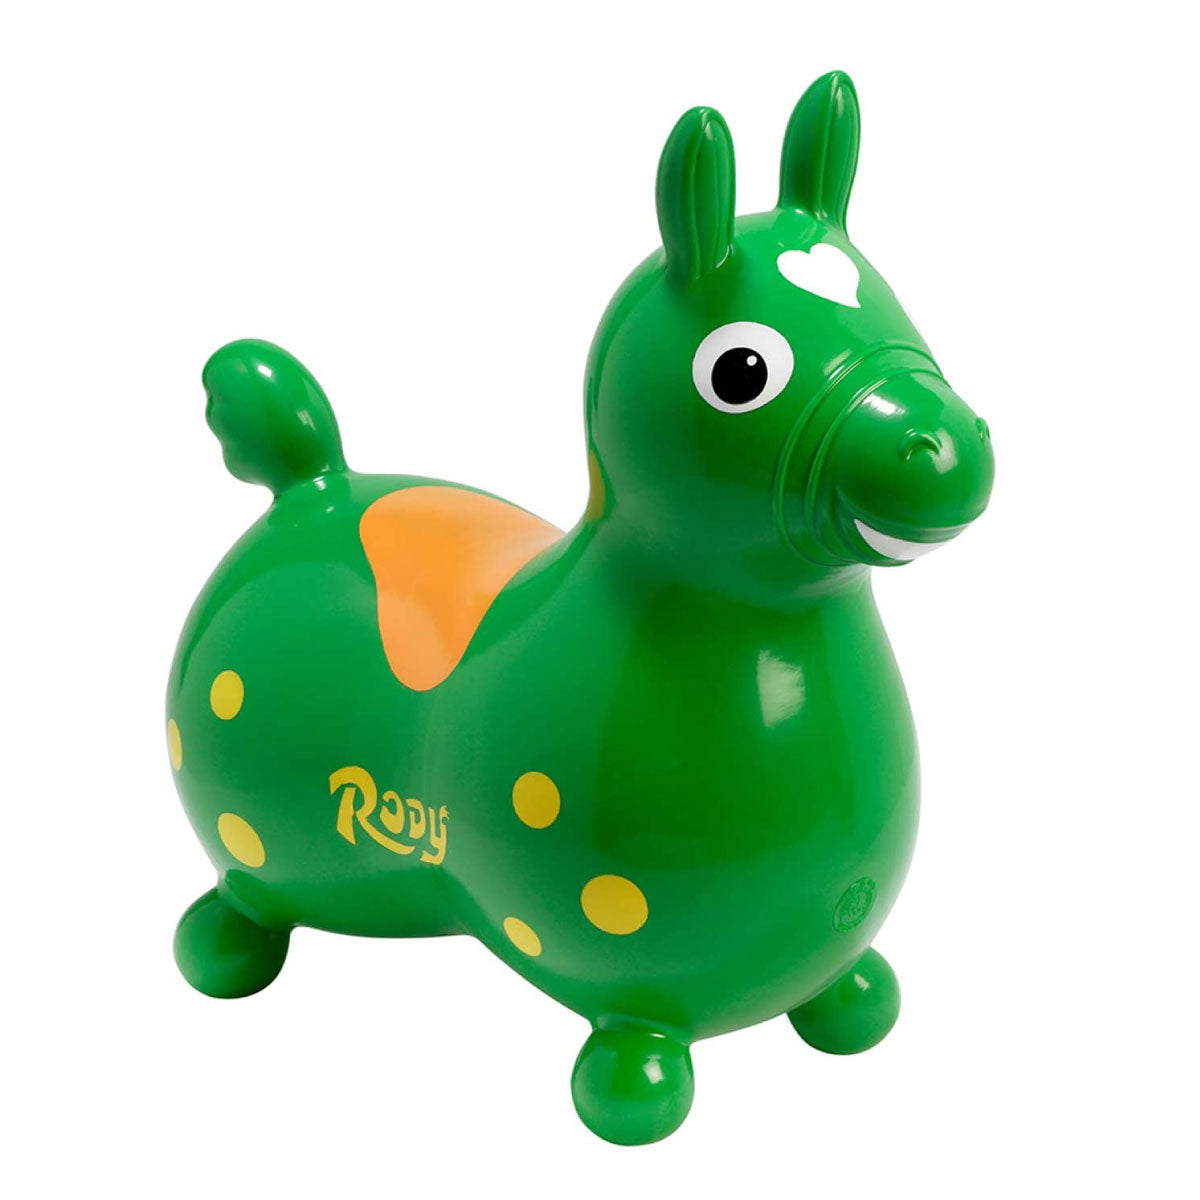 Green Rody Horse from Gymnic